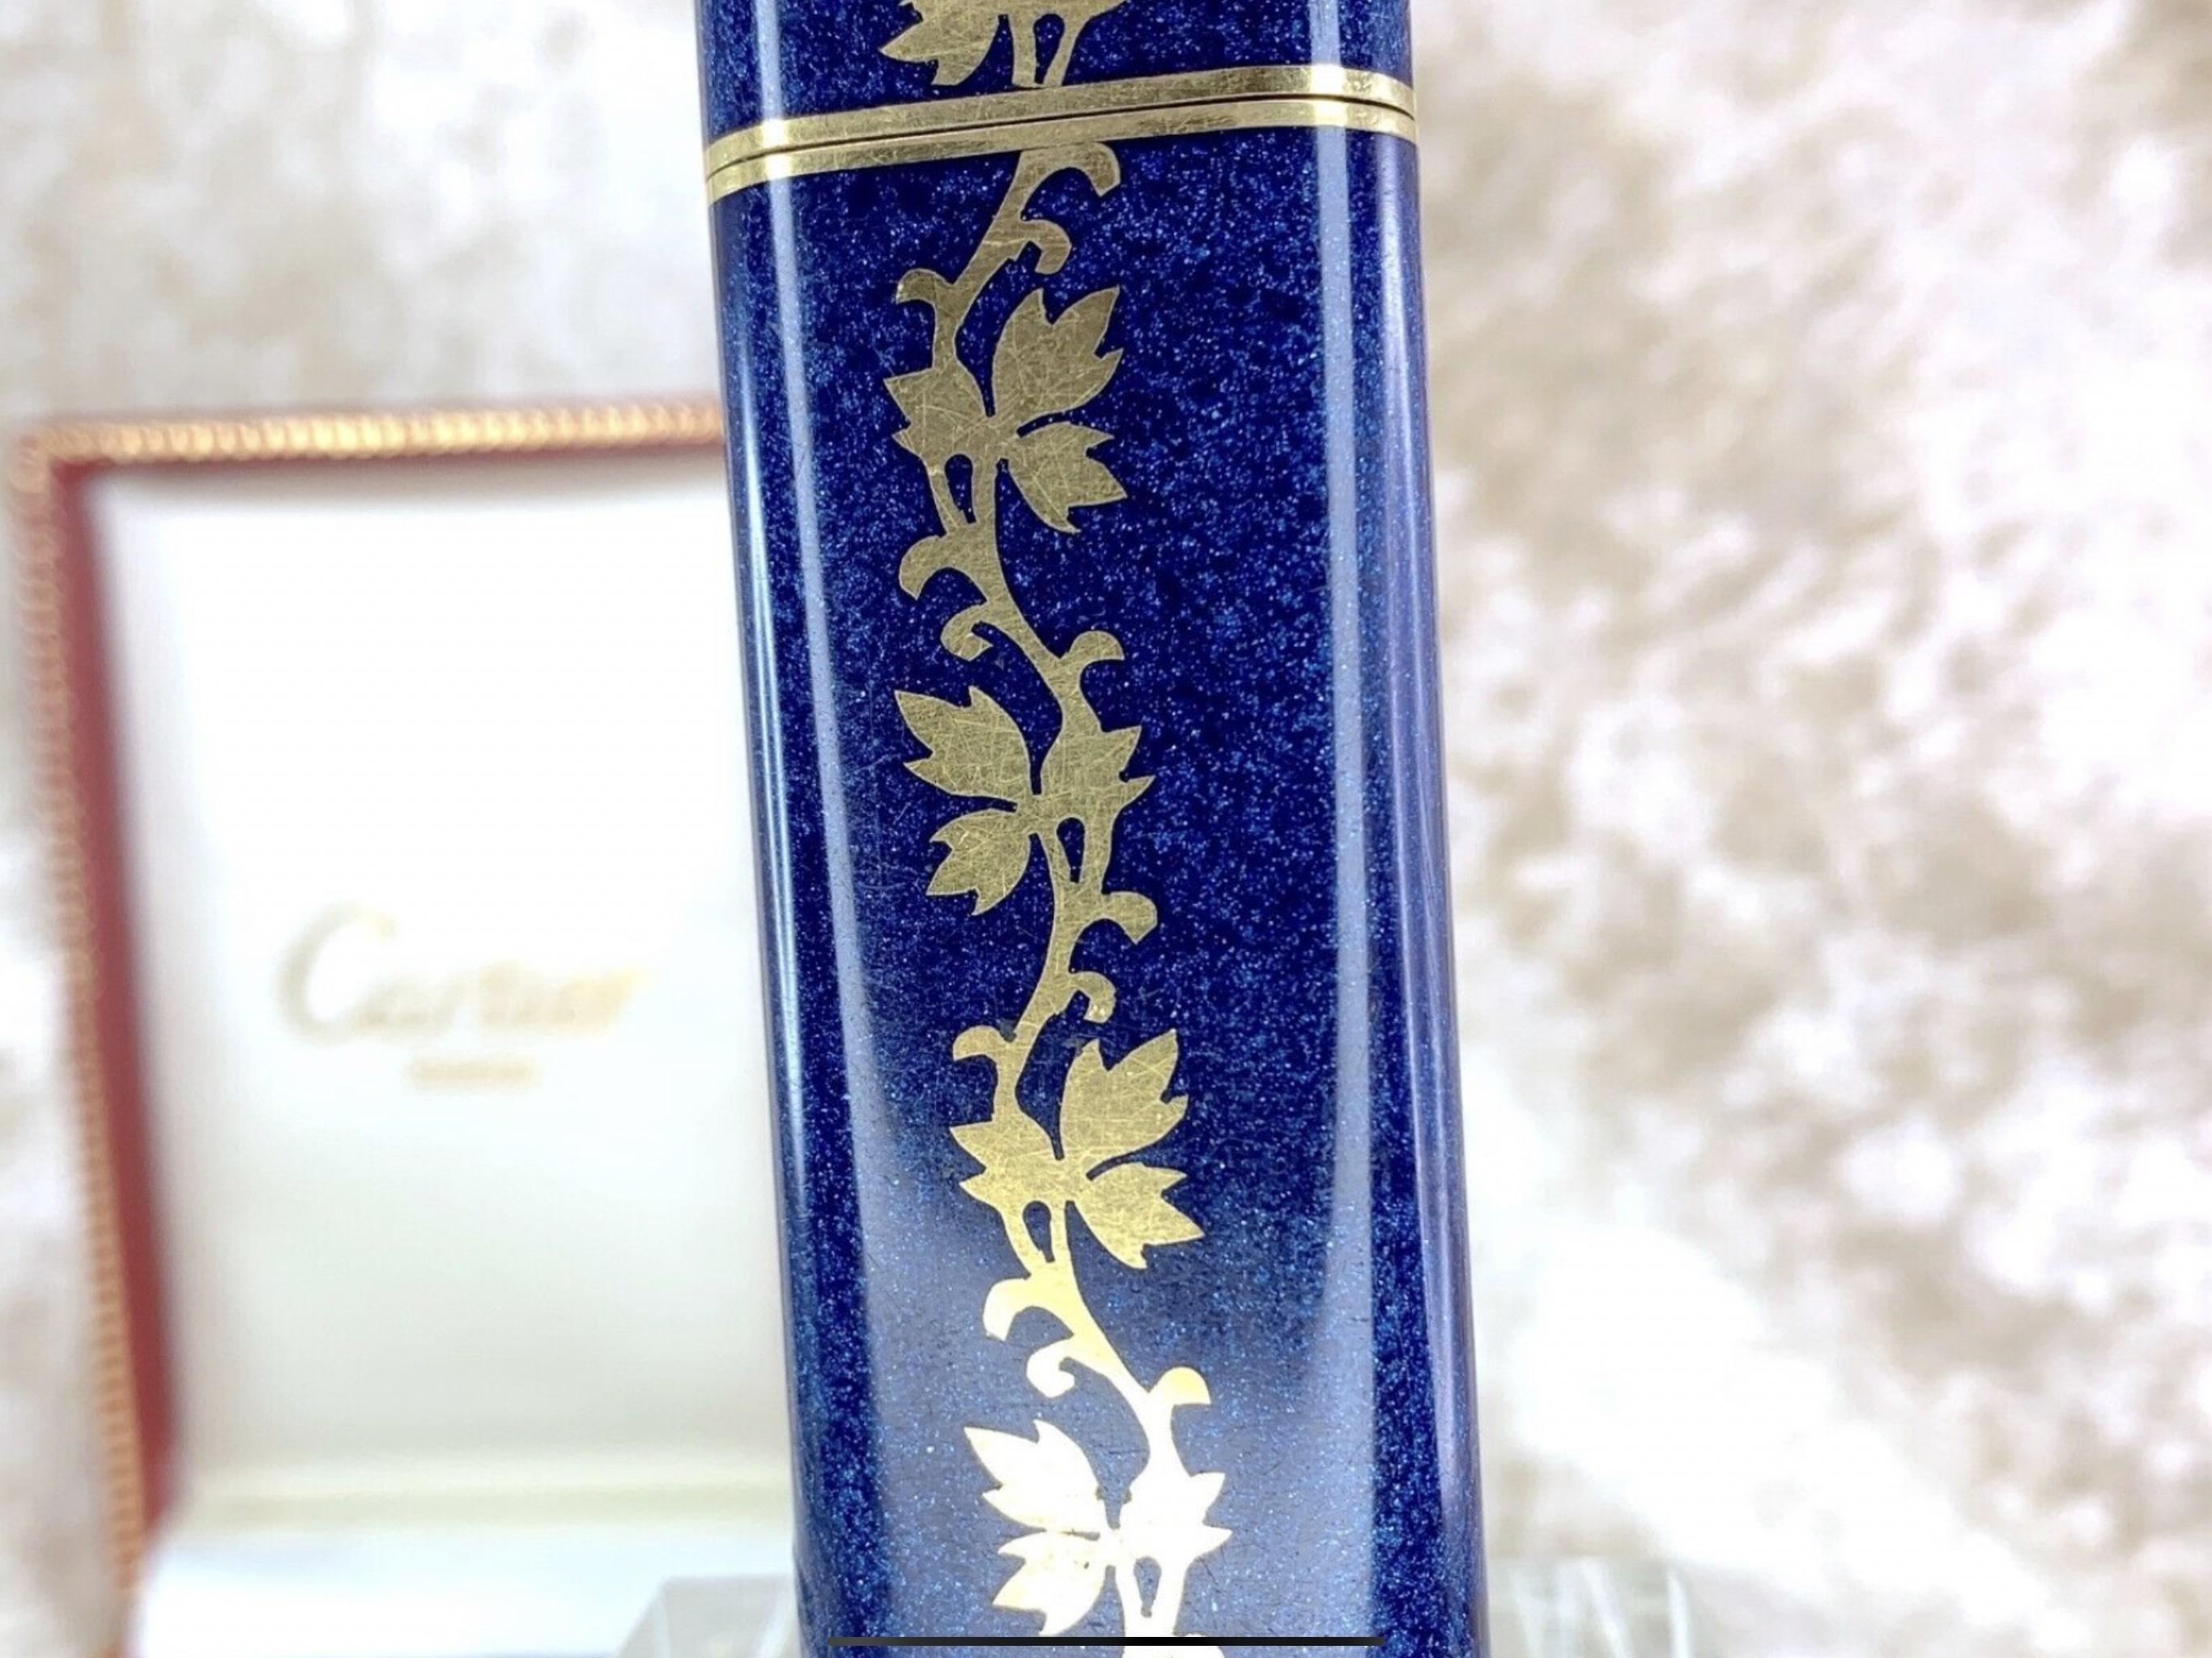 Beautiful and Very Rare Vintage Cartier Lighter in Blue Lacquer 
Gold Plated 18K
Gold flower oriental pattern 
Le Must De Cartier 
Circa 2000
In mint working condition
The lighter sparks, ignites and flames 
Comes with Original Cartier Case 
Elegant